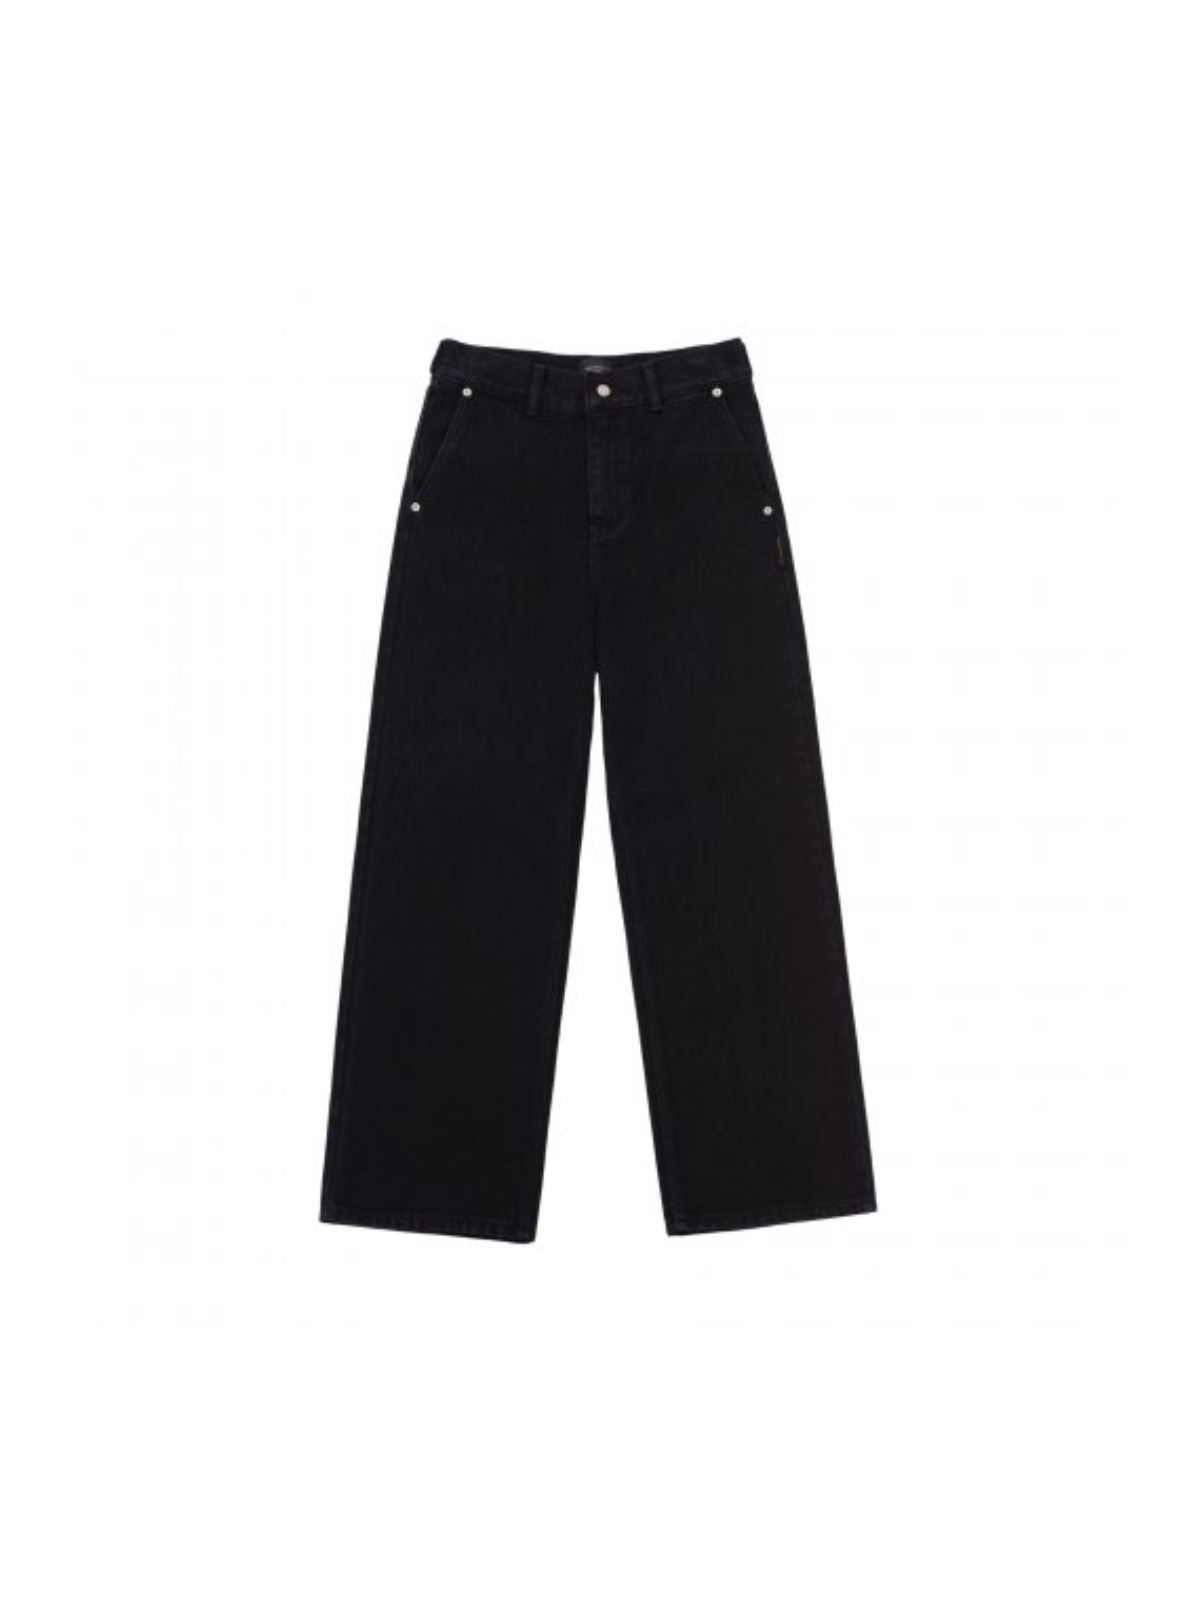 ADLV Two Way Twill Pants Black – WORMHOLE STORE